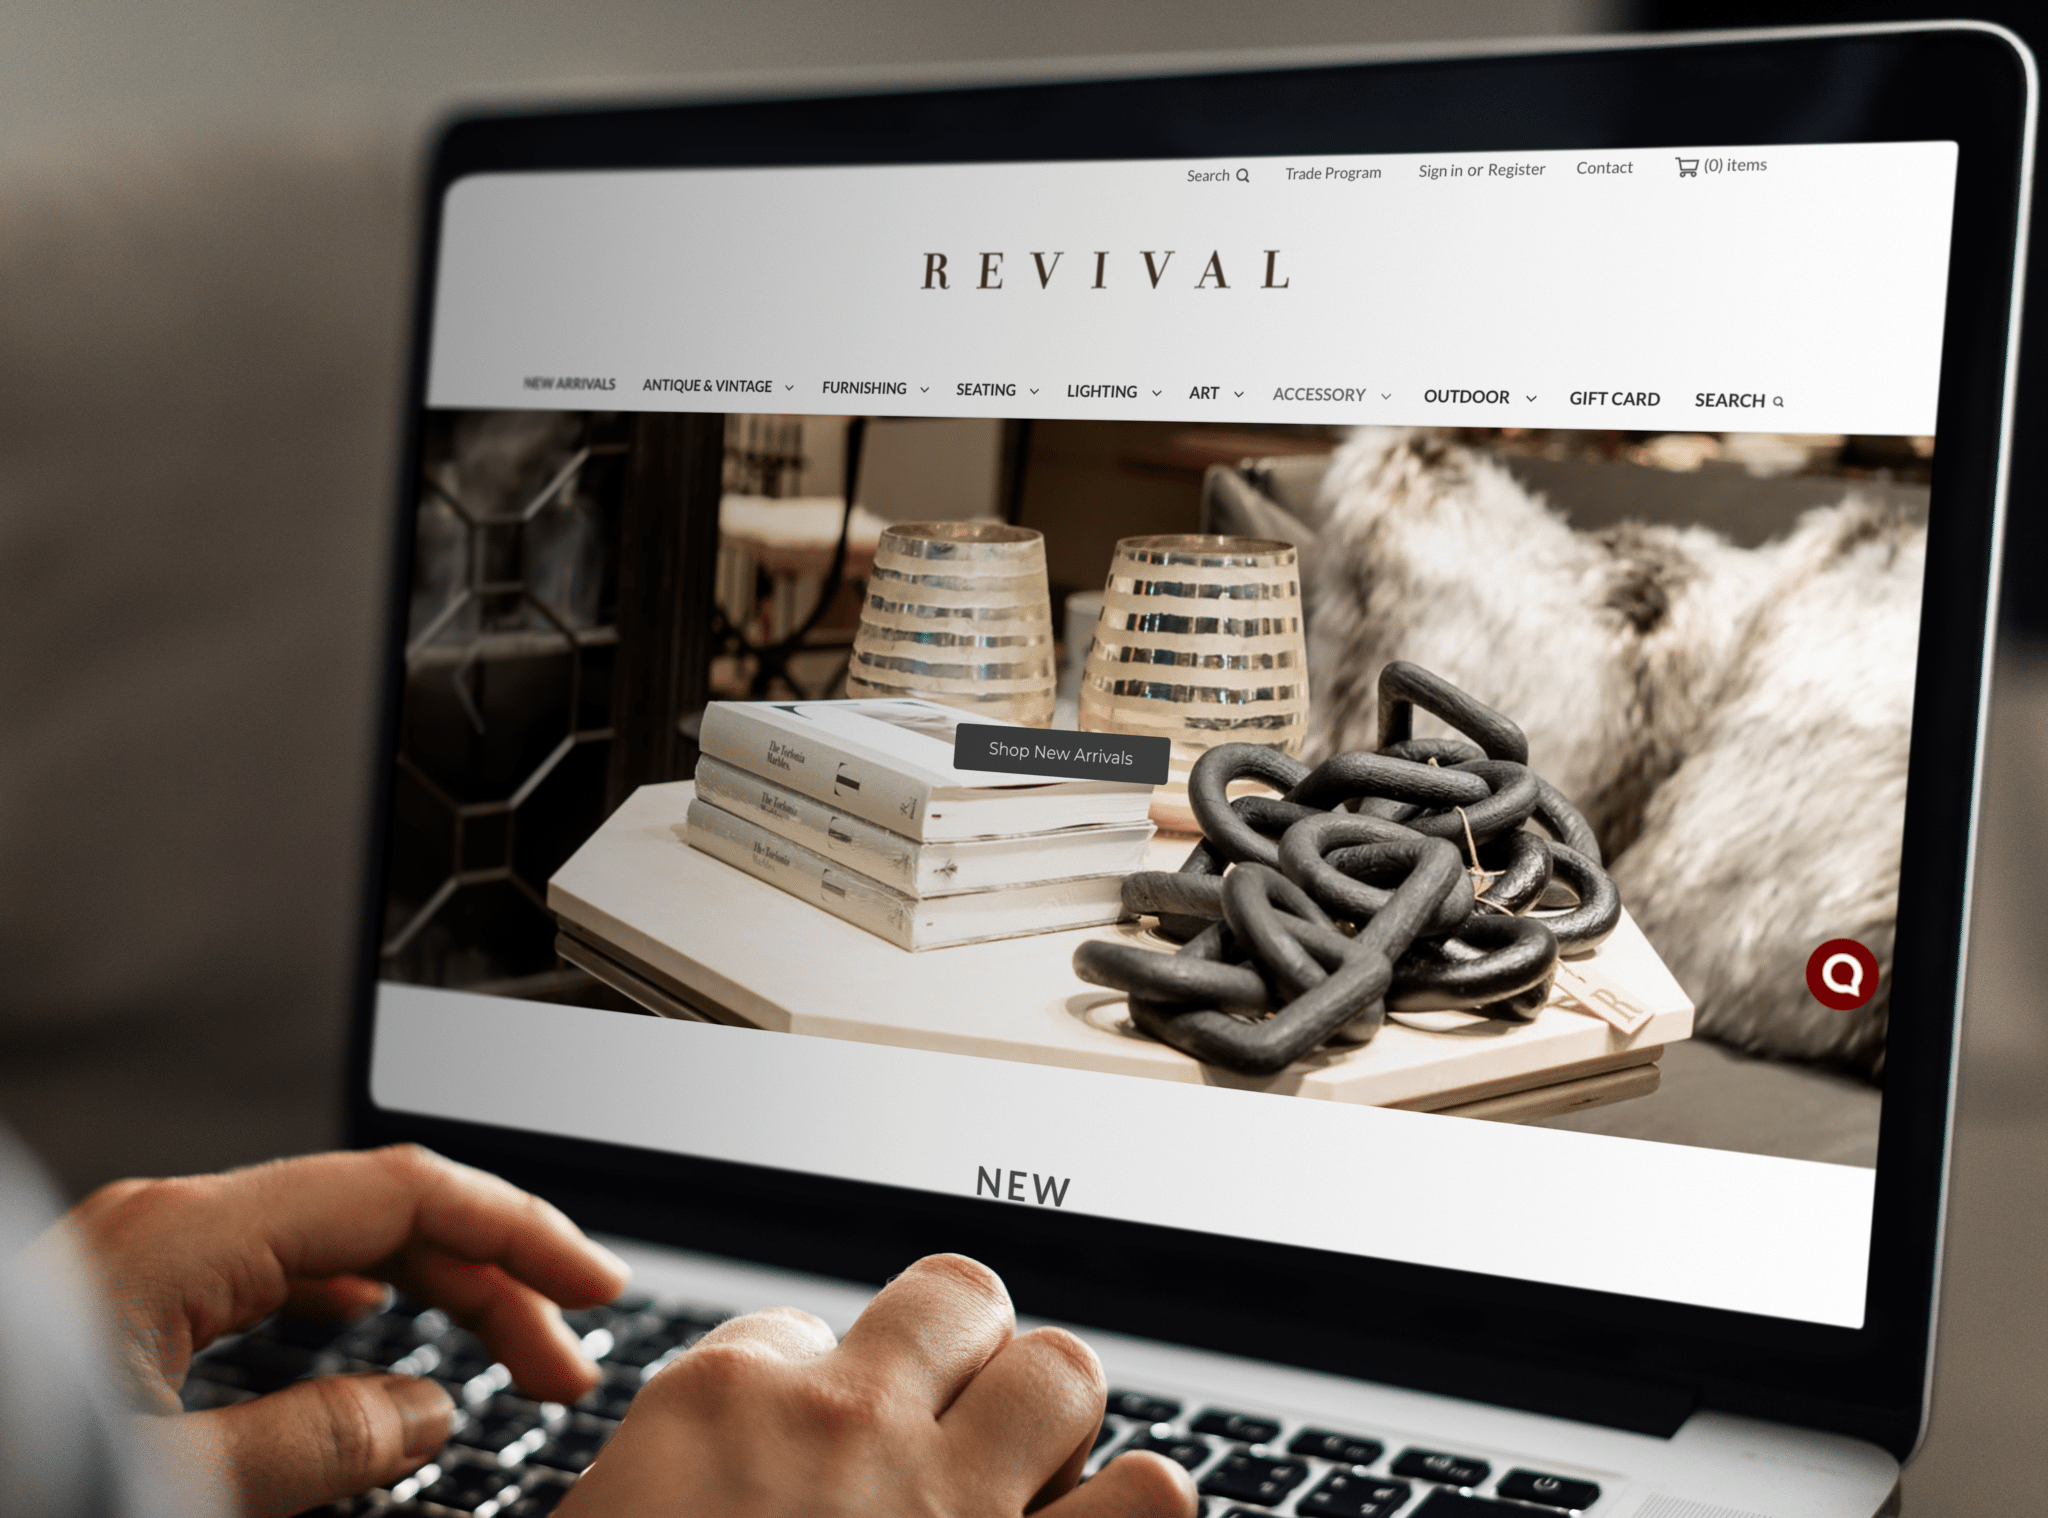 Hands on a laptop keyboard as they shop the Revival website.